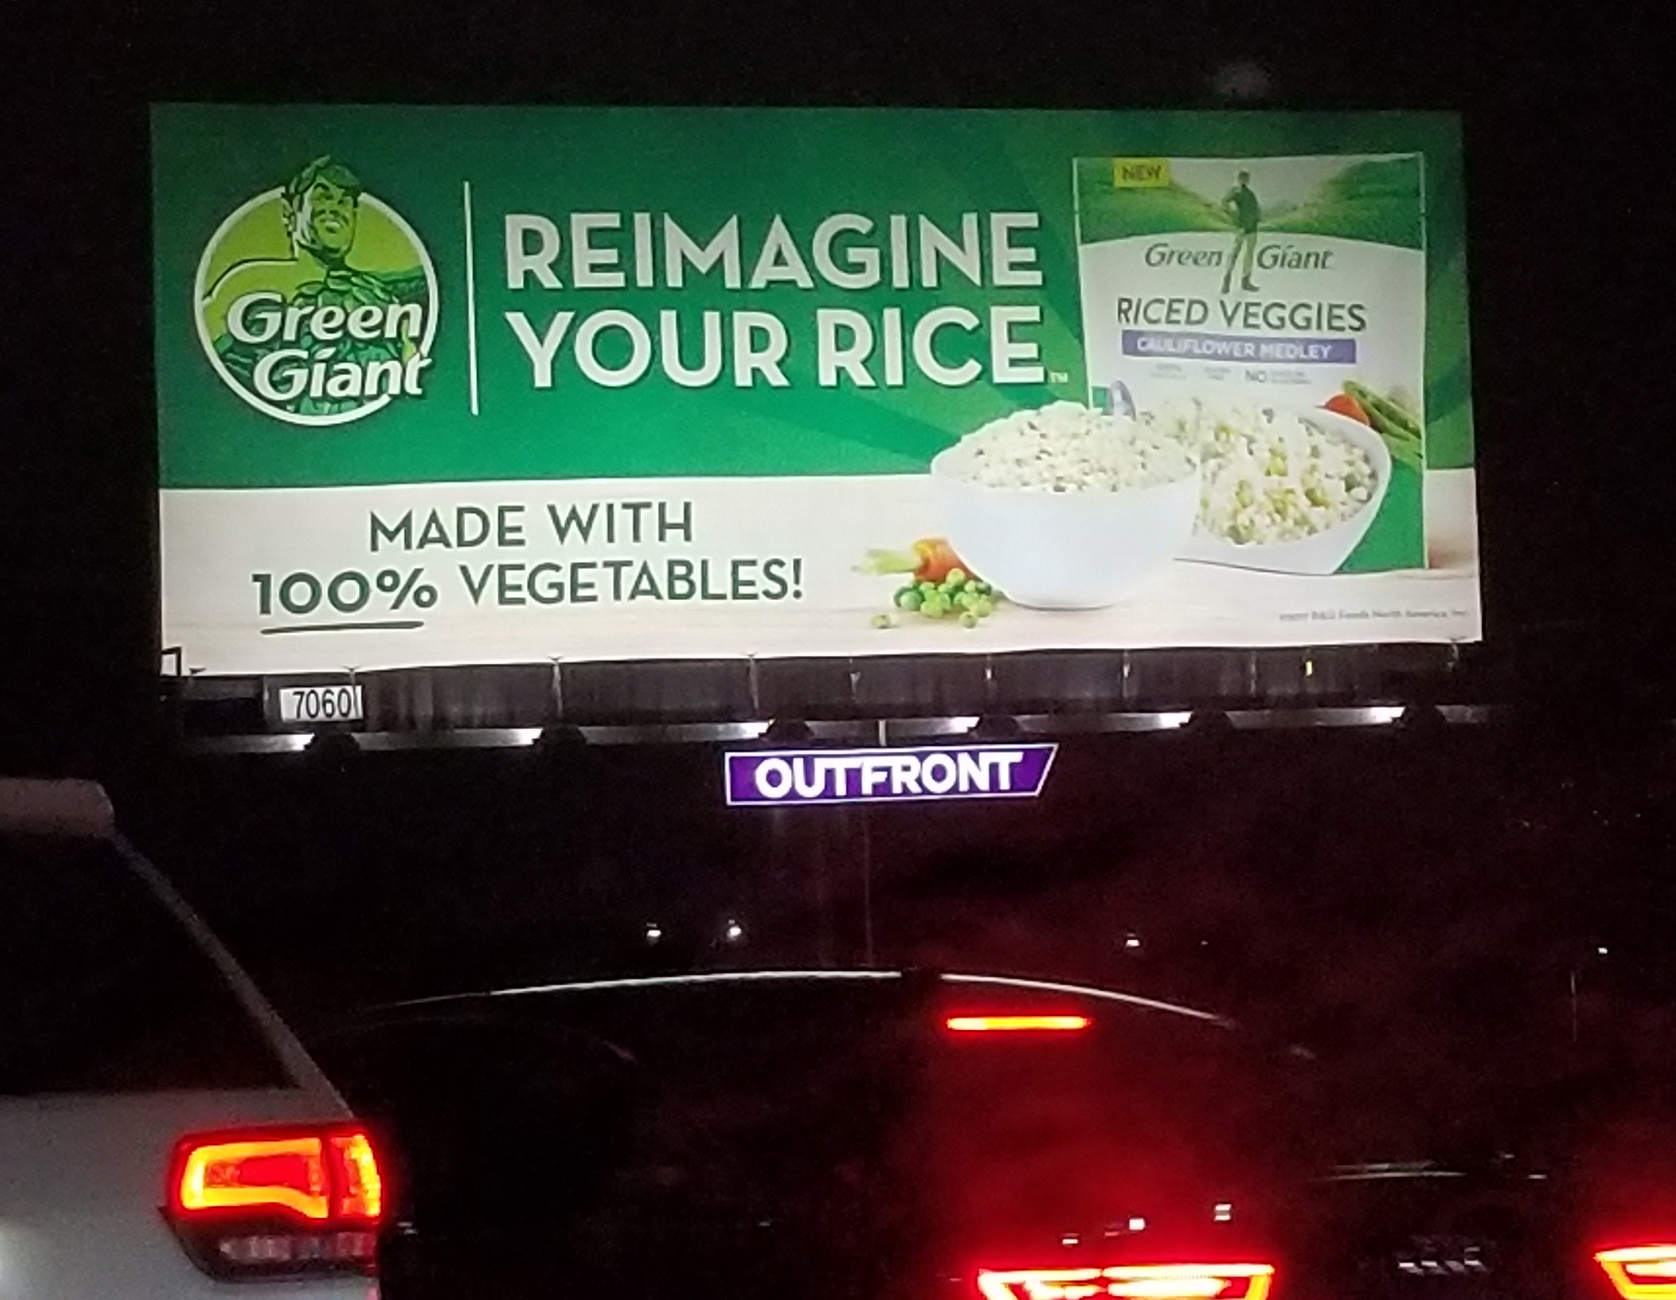 Green Giant billboard with the message "Reimagine Your Rice"